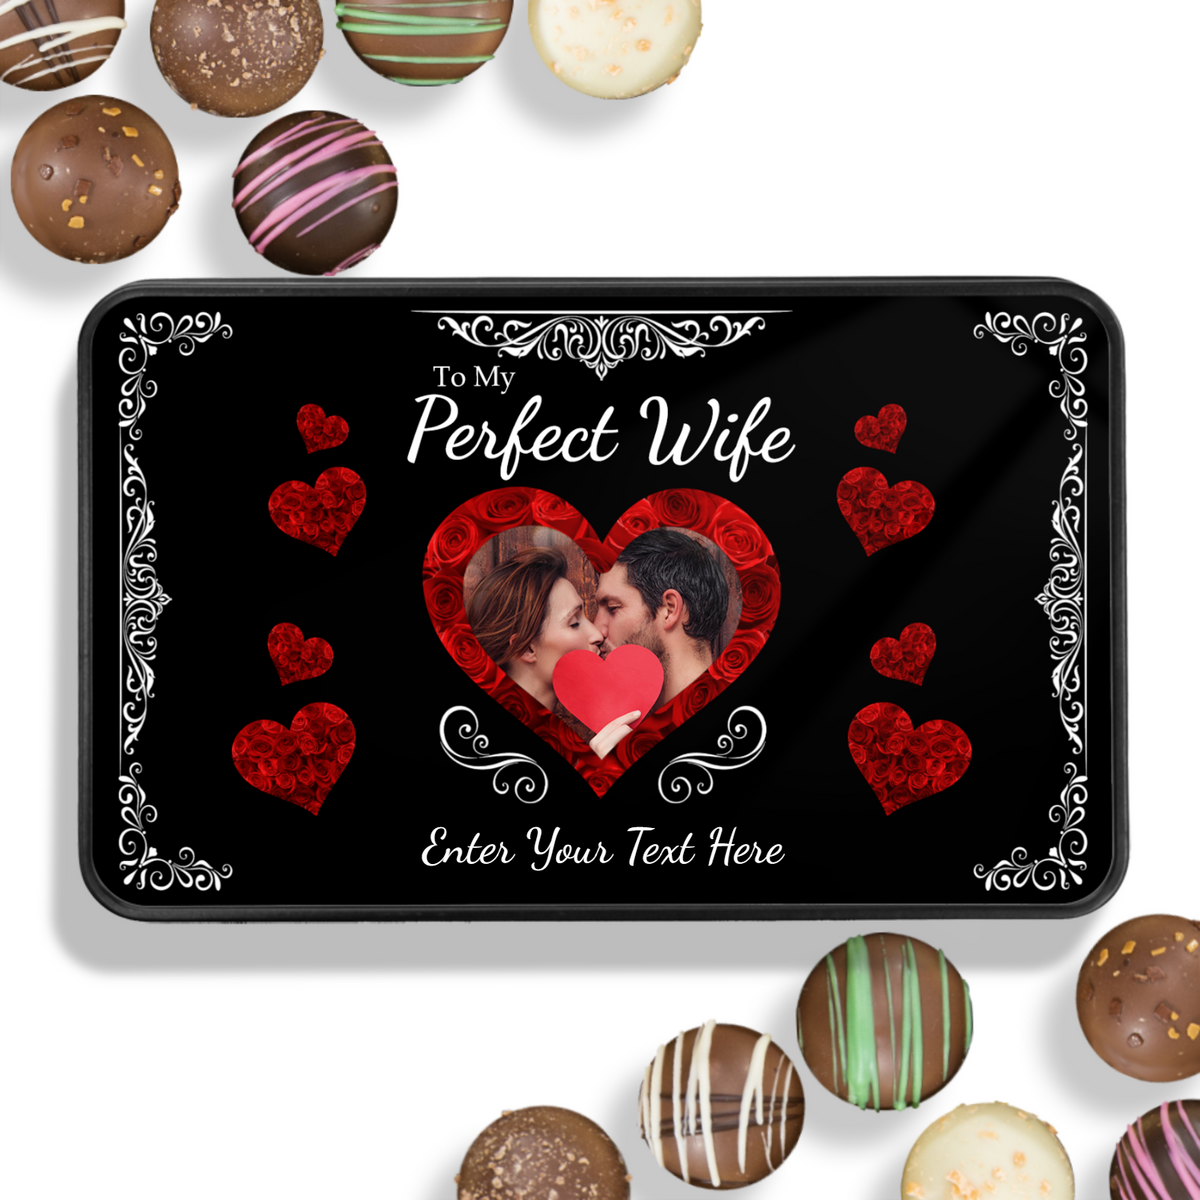 To My Perfect Wife - Tin Of Chocolate Truffles With Photo Upload & Sign Off - Custom Personalized